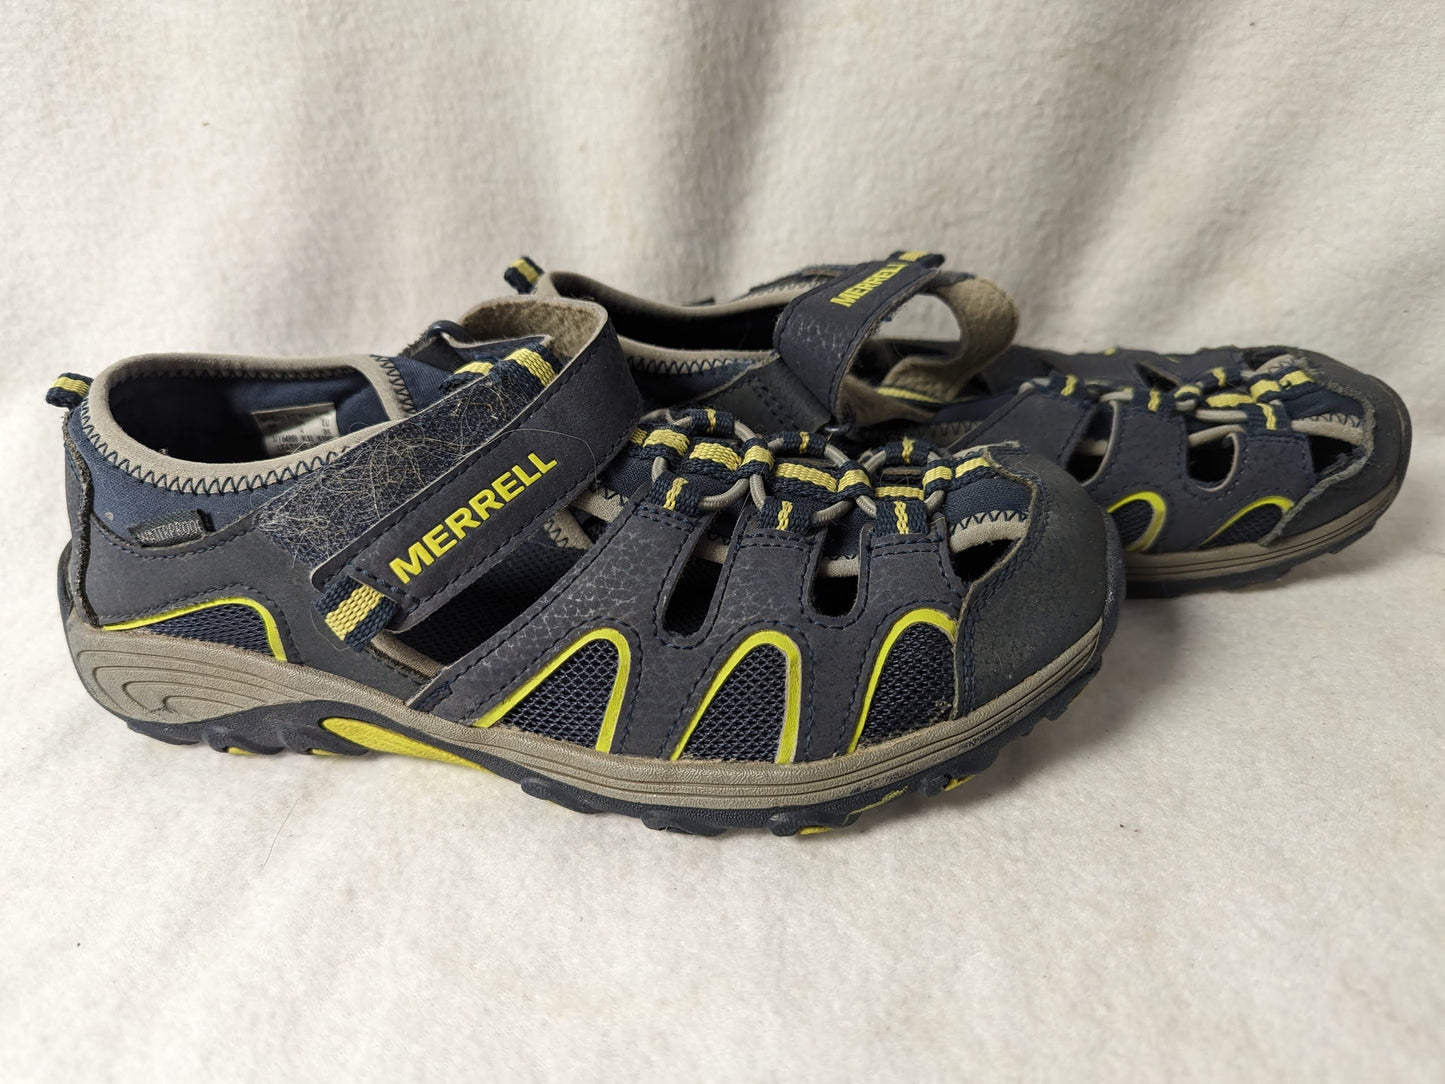 Merrell Youth Water Shoes Size 5 Color Blue Condition Used